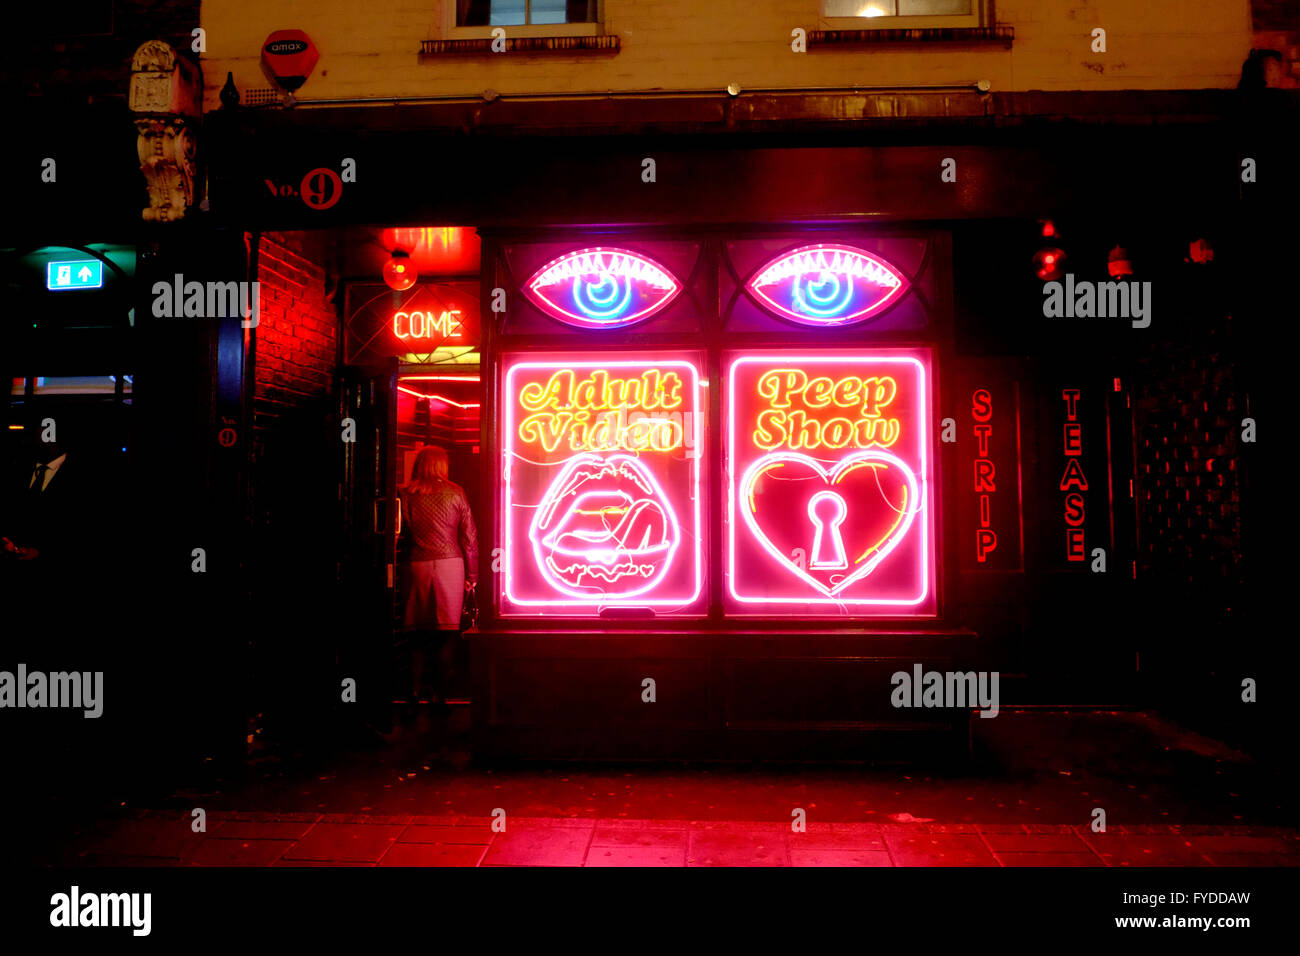 Woman entering Adult Video, Peep Show, Strip Tease, Sex store in Soho, London Stock Photo picture